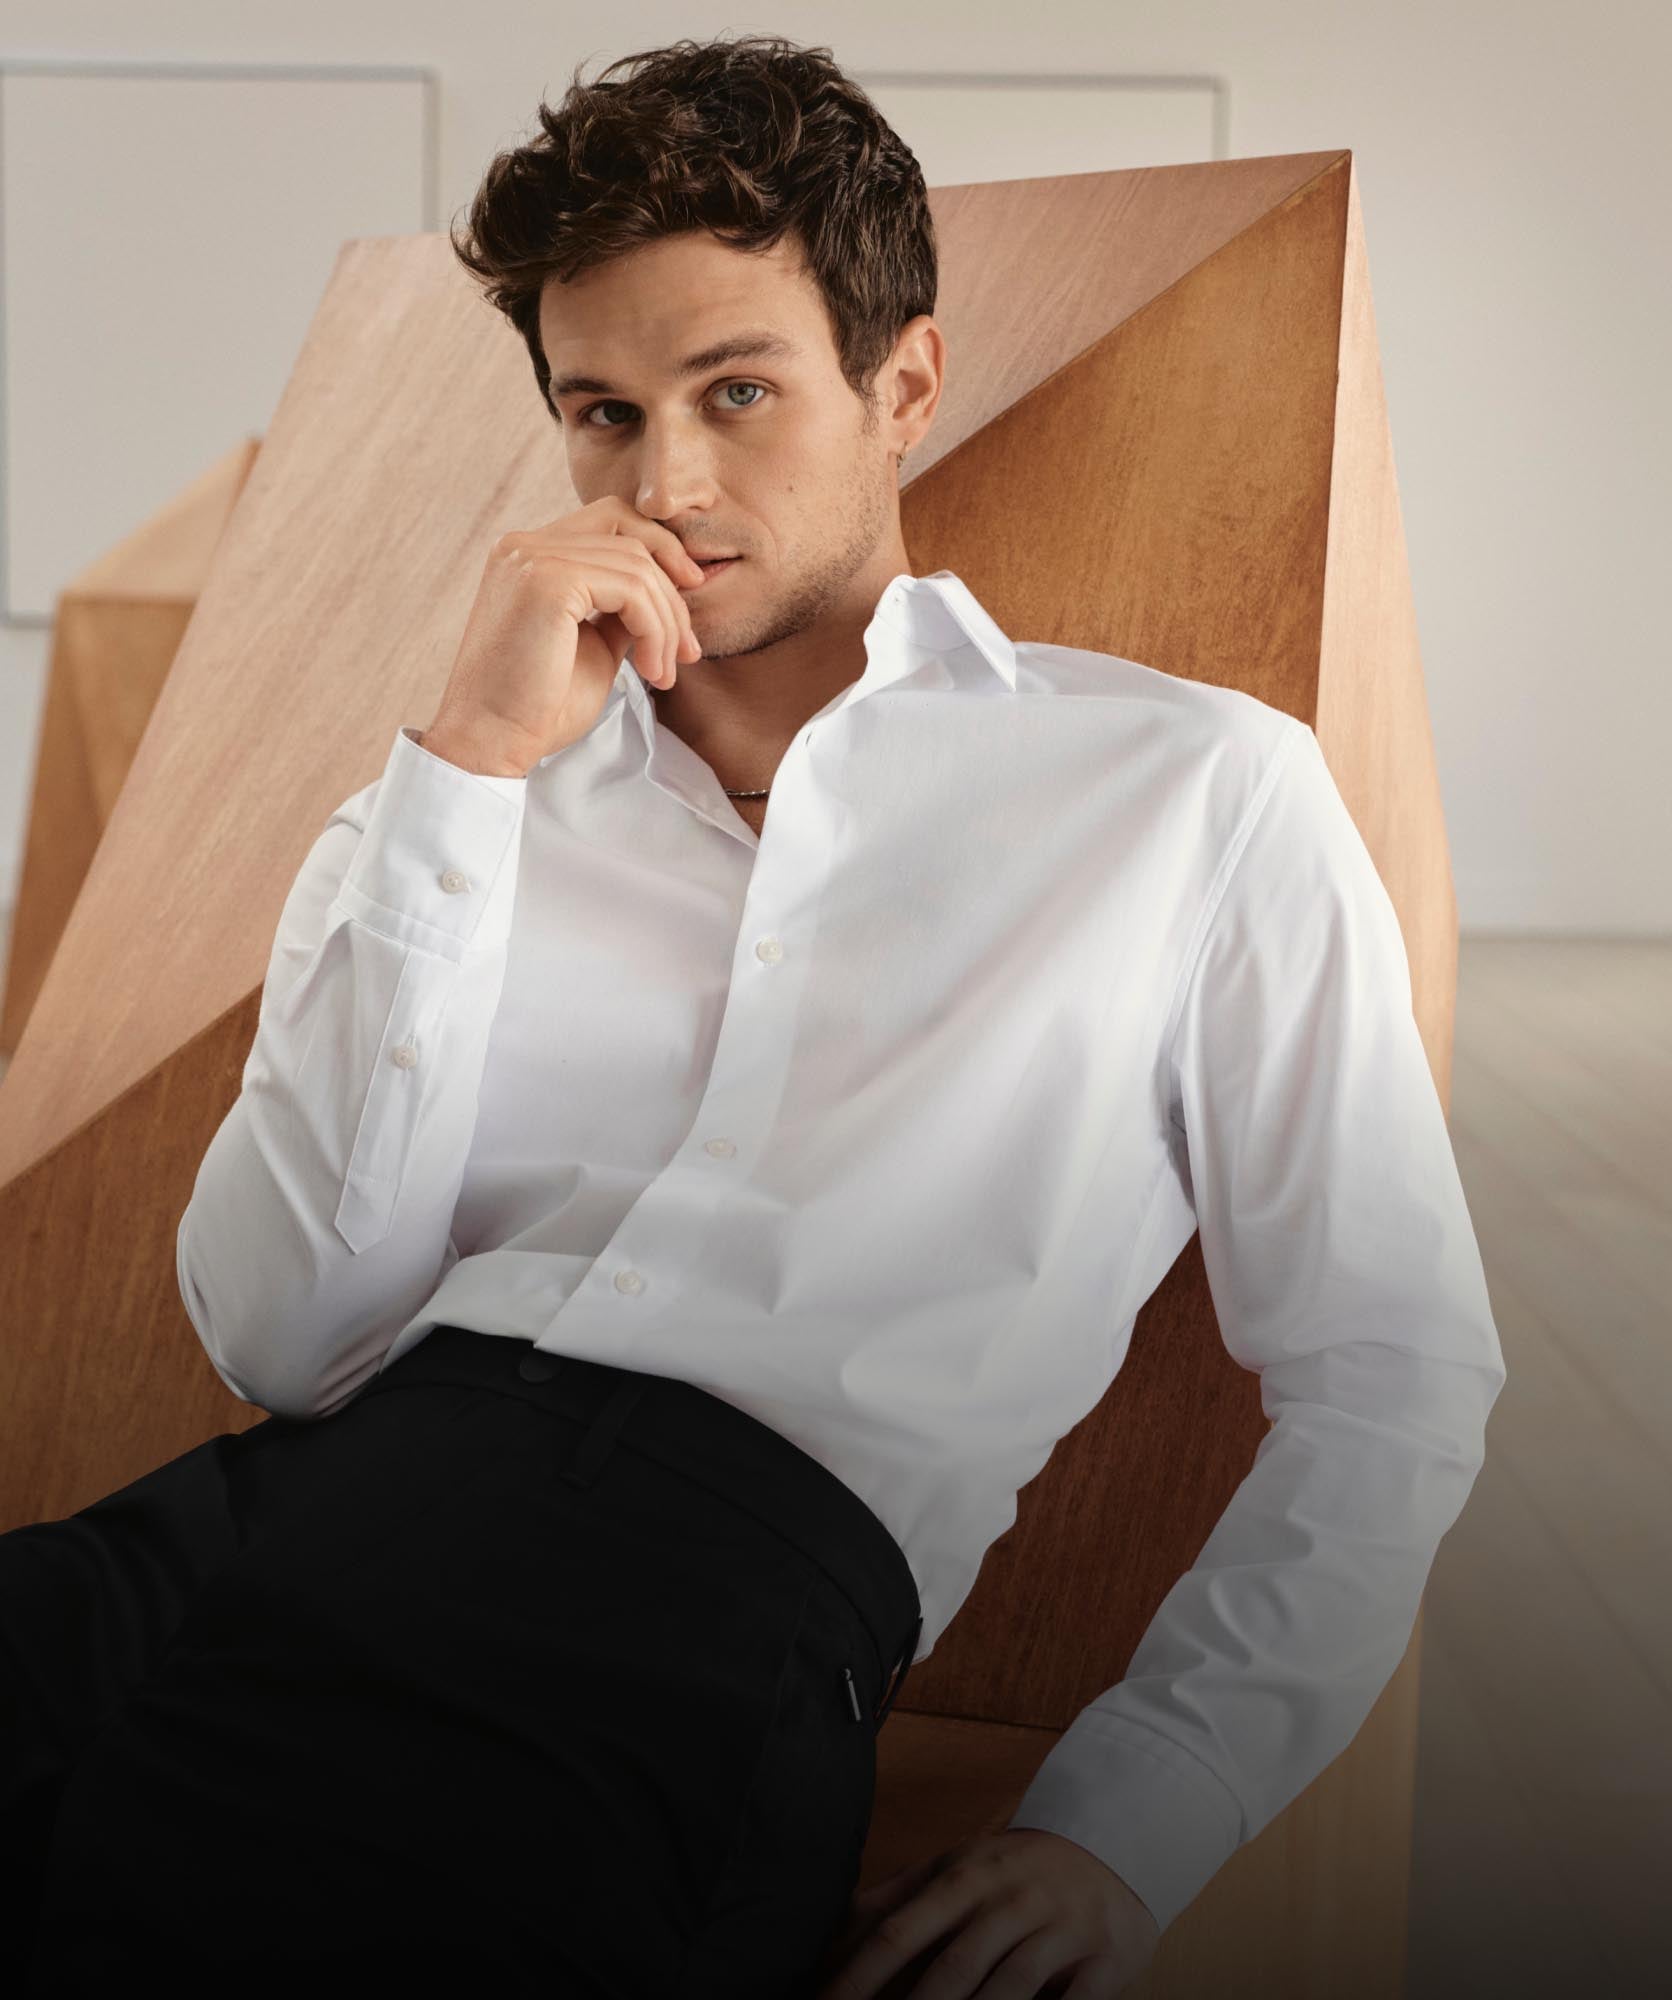 Brandon Flynn leaning back on a chair wearing a white button down shirt